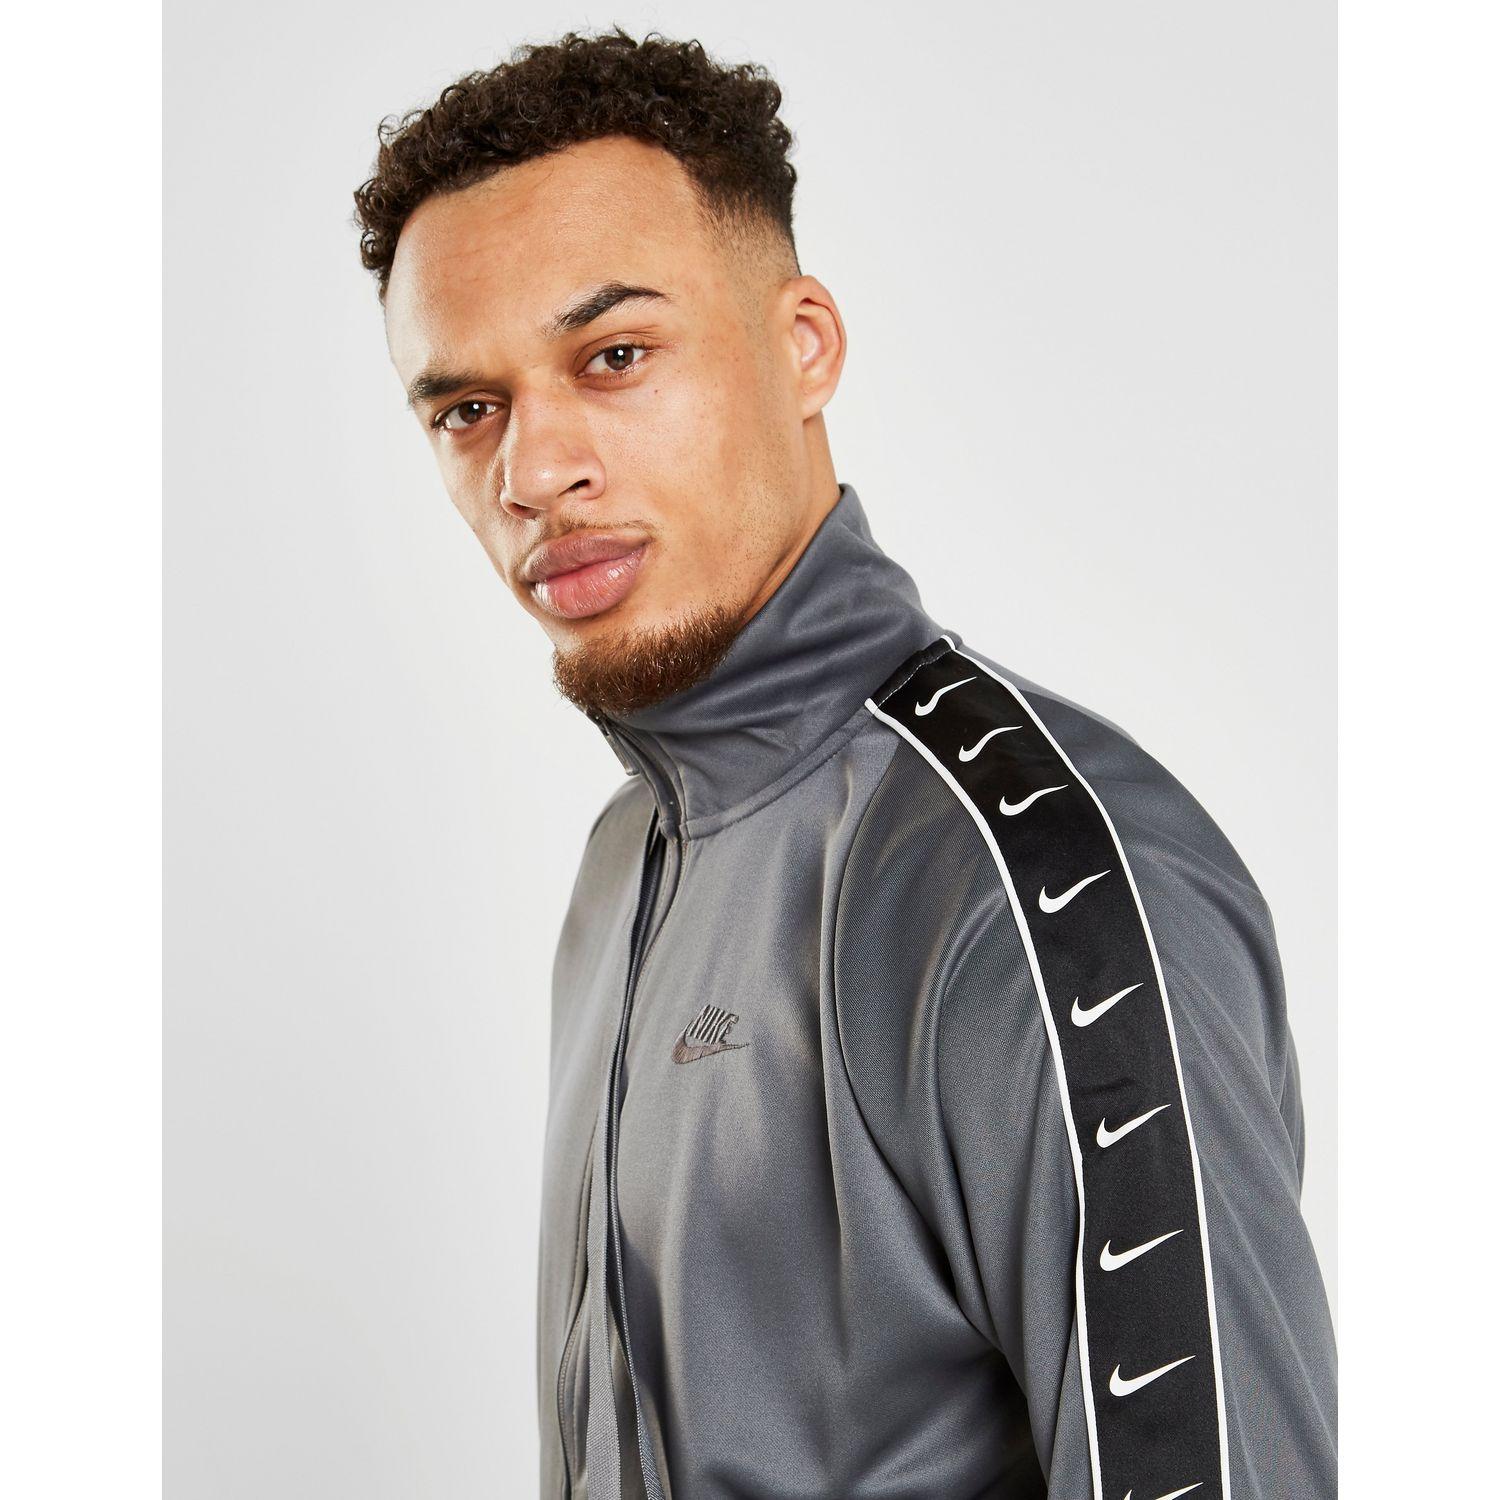 grey nike tape tracksuit buy clothes 